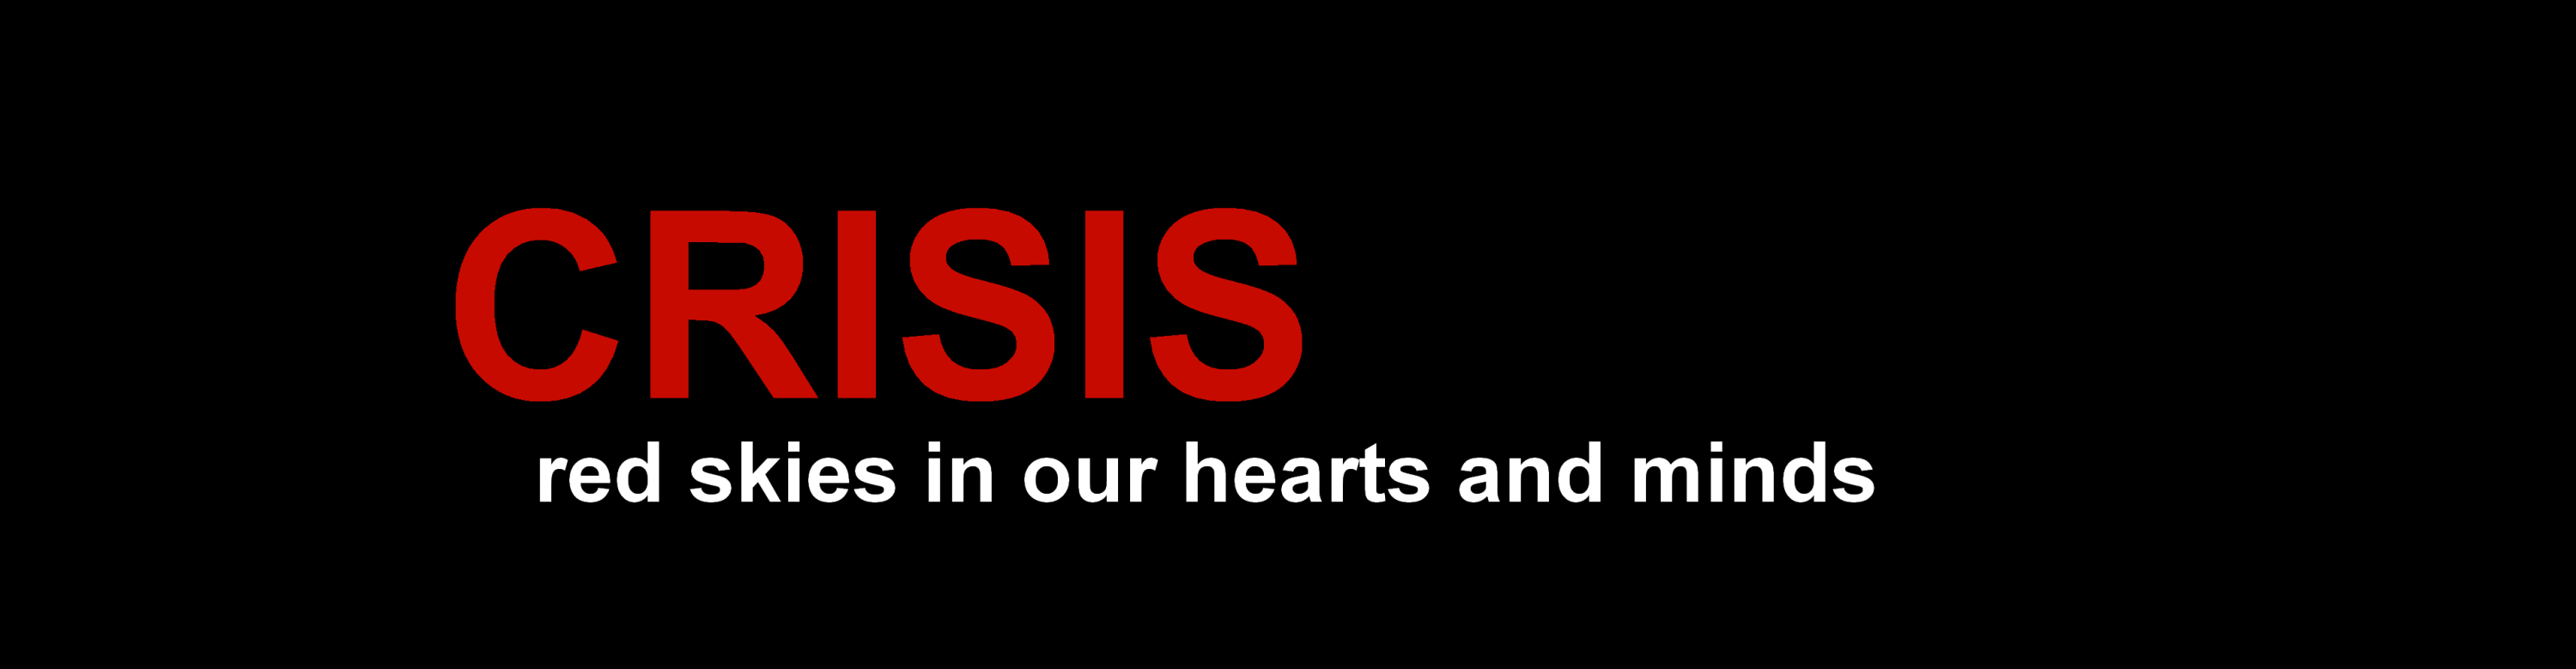 crisis: red skies in our hearts and minds